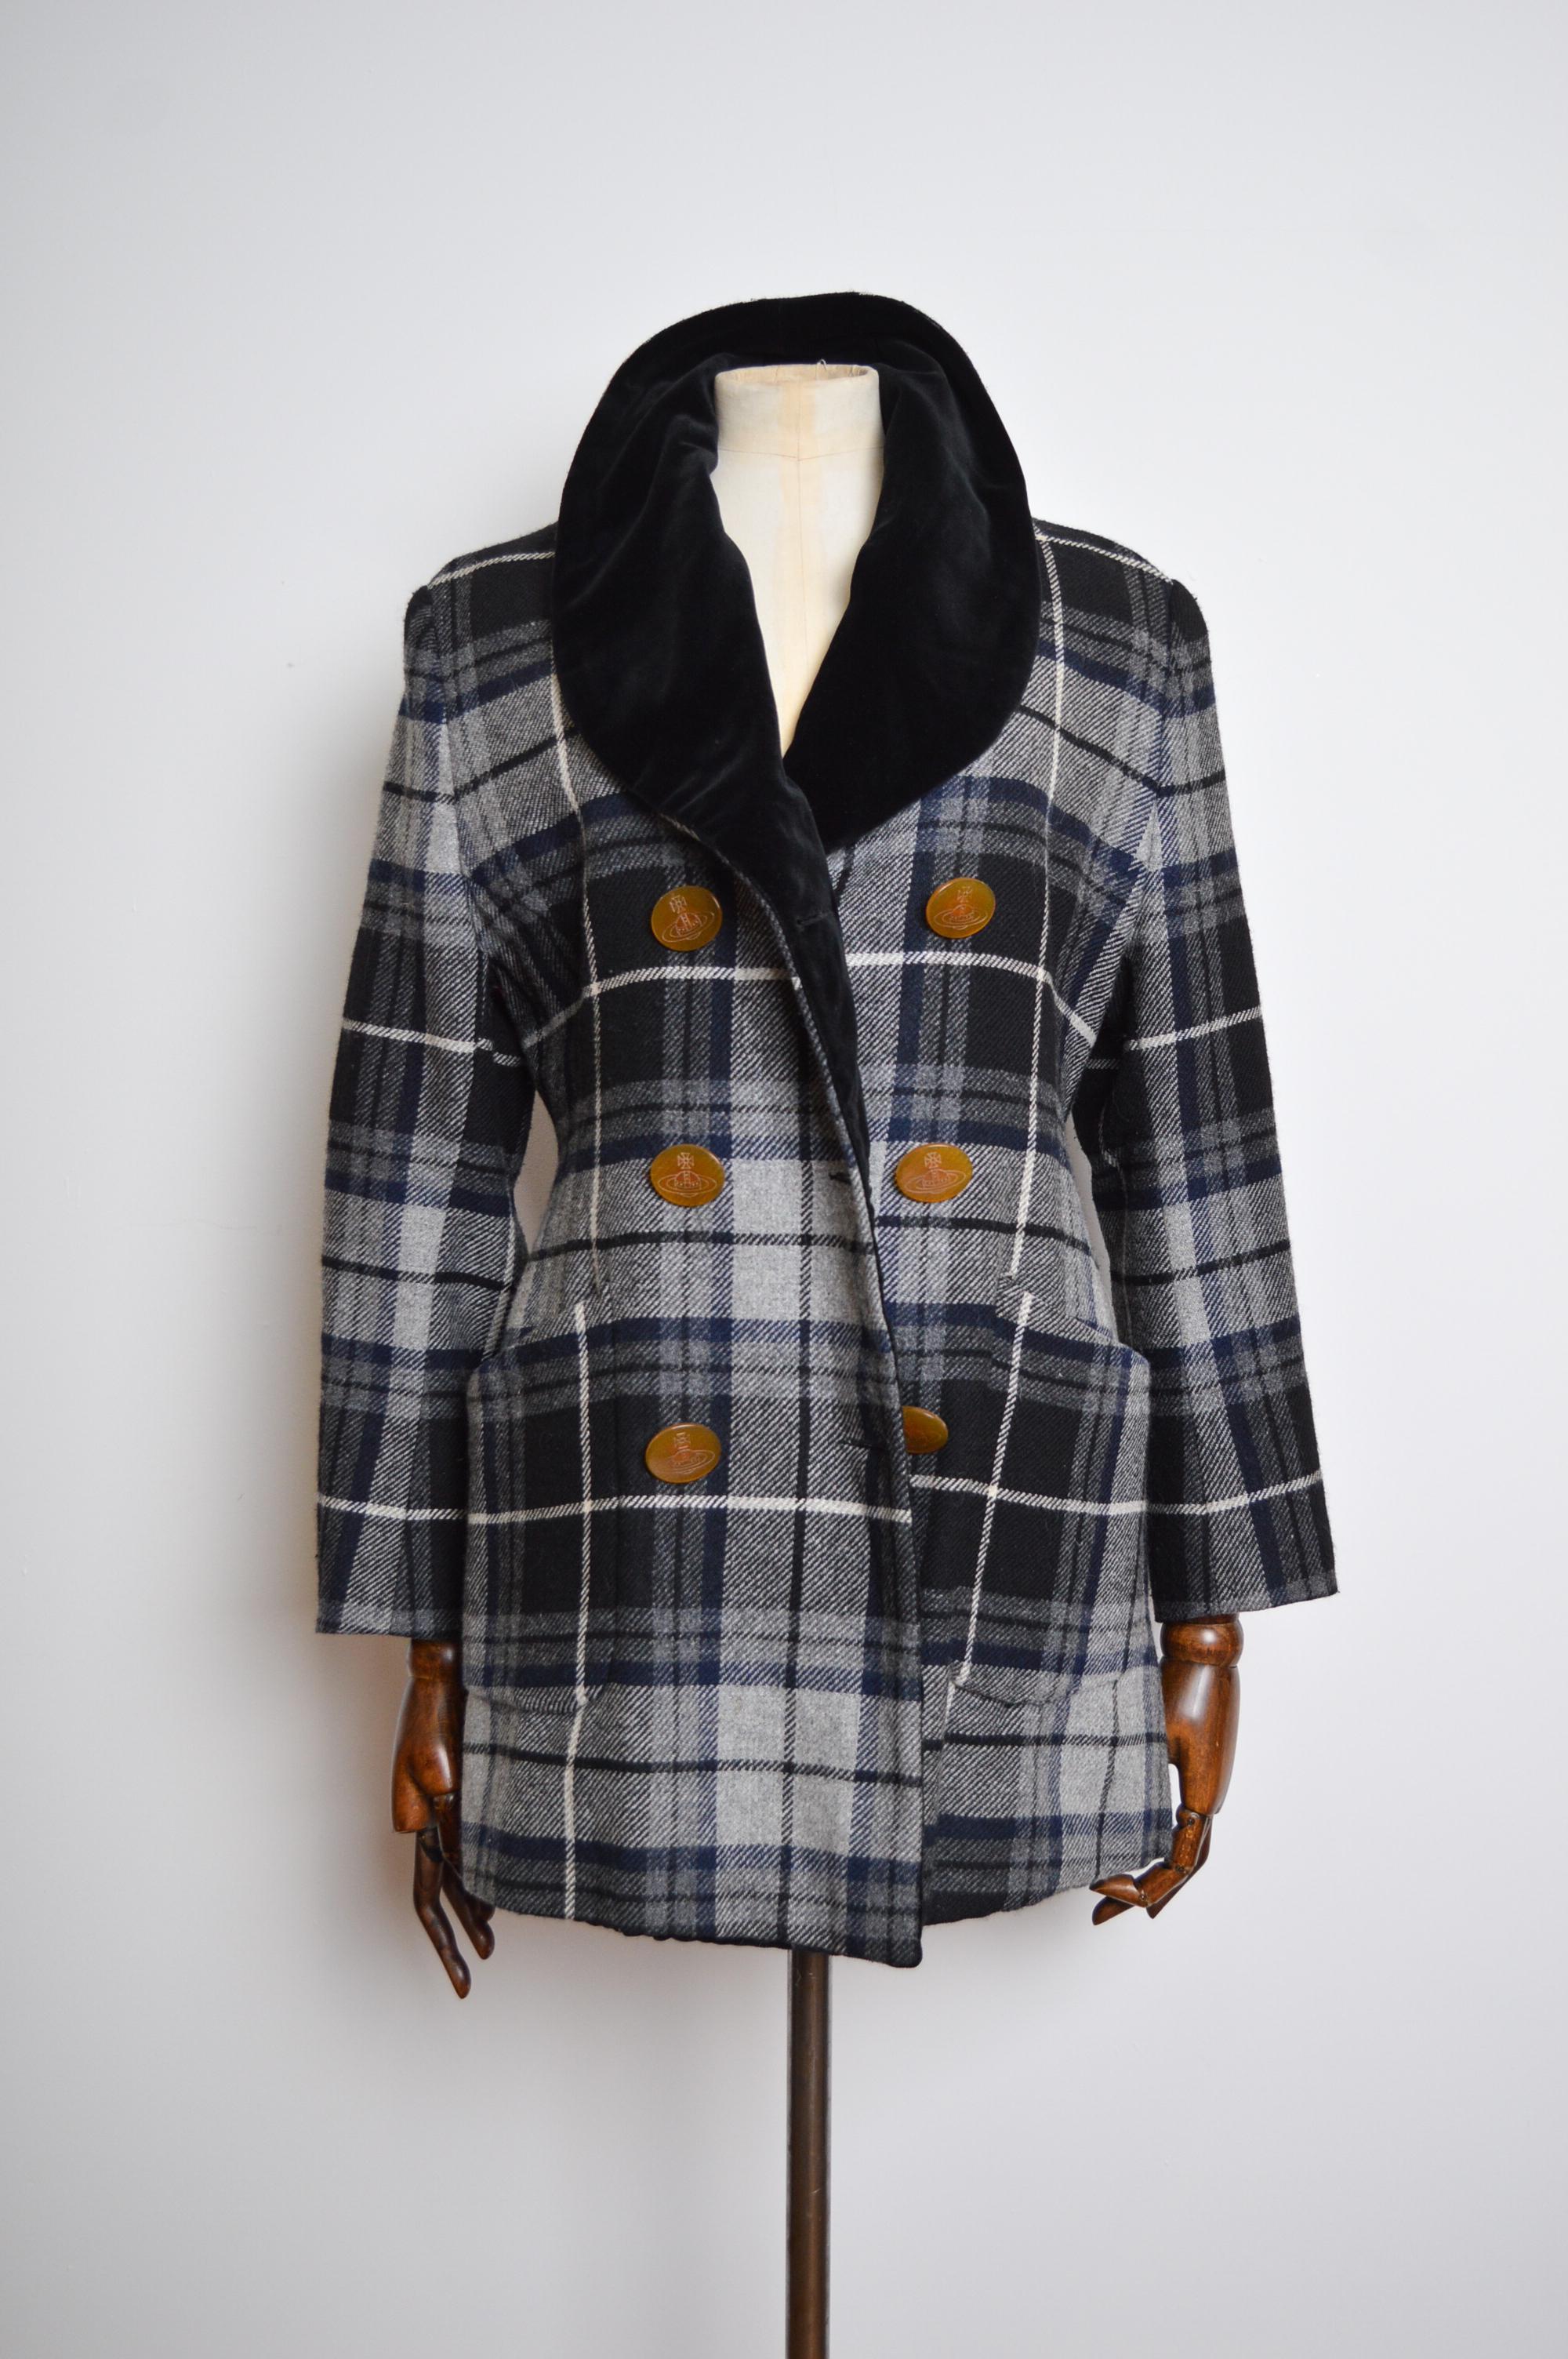 Rare Vivienne Westwood 3 Suisses AW 1995/ 1996 Collab Checked Tartan Wool Coat  For Sale 10